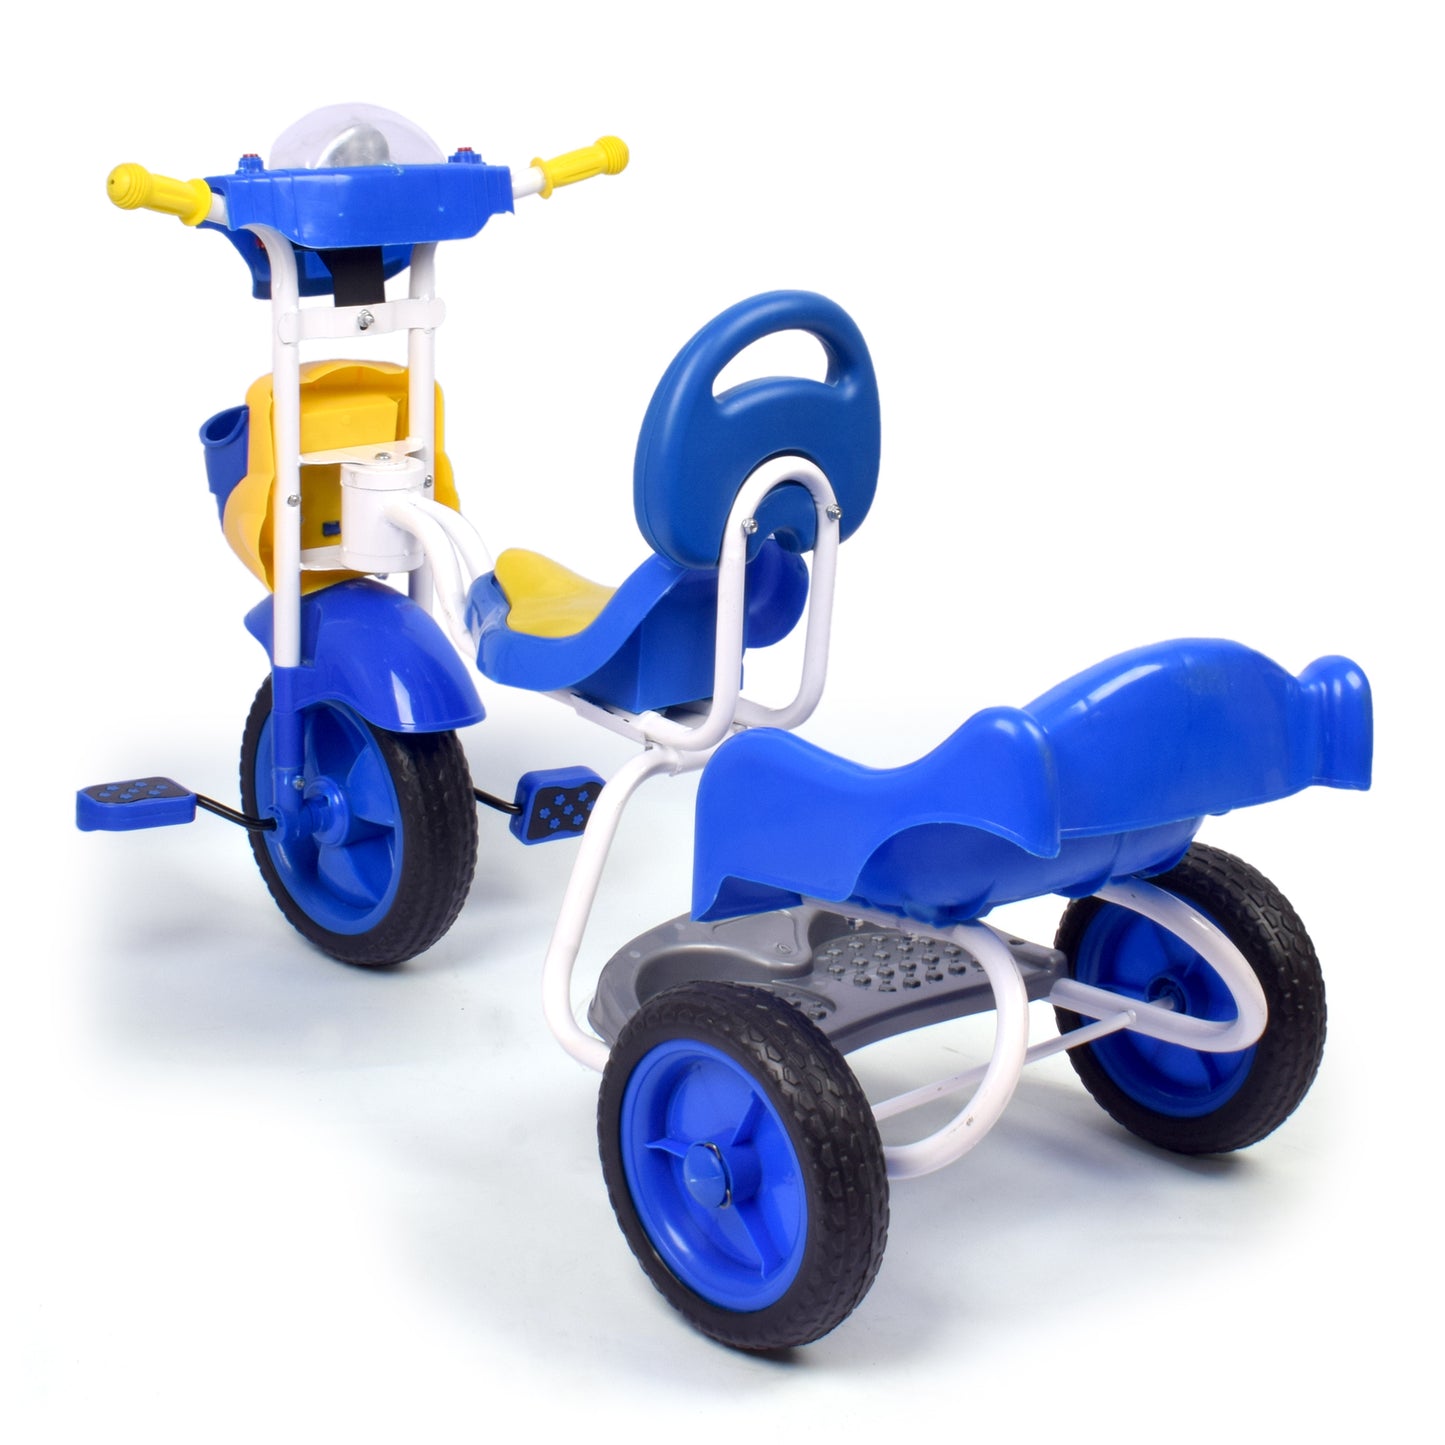 2 Kids Robot Tricycle